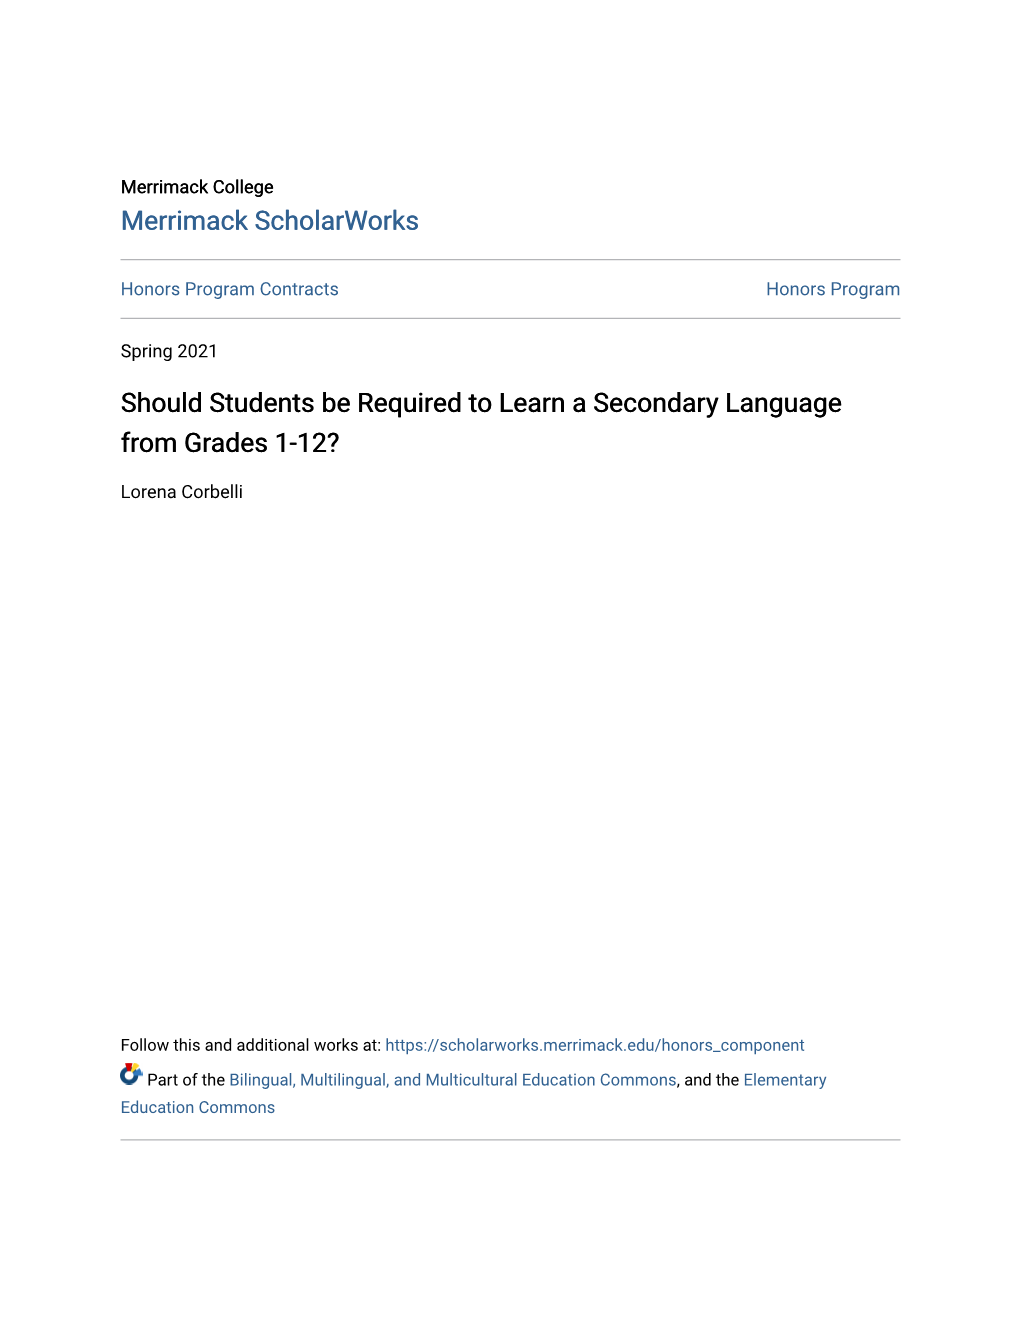 Should Students Be Required to Learn a Secondary Language from Grades 1-12?